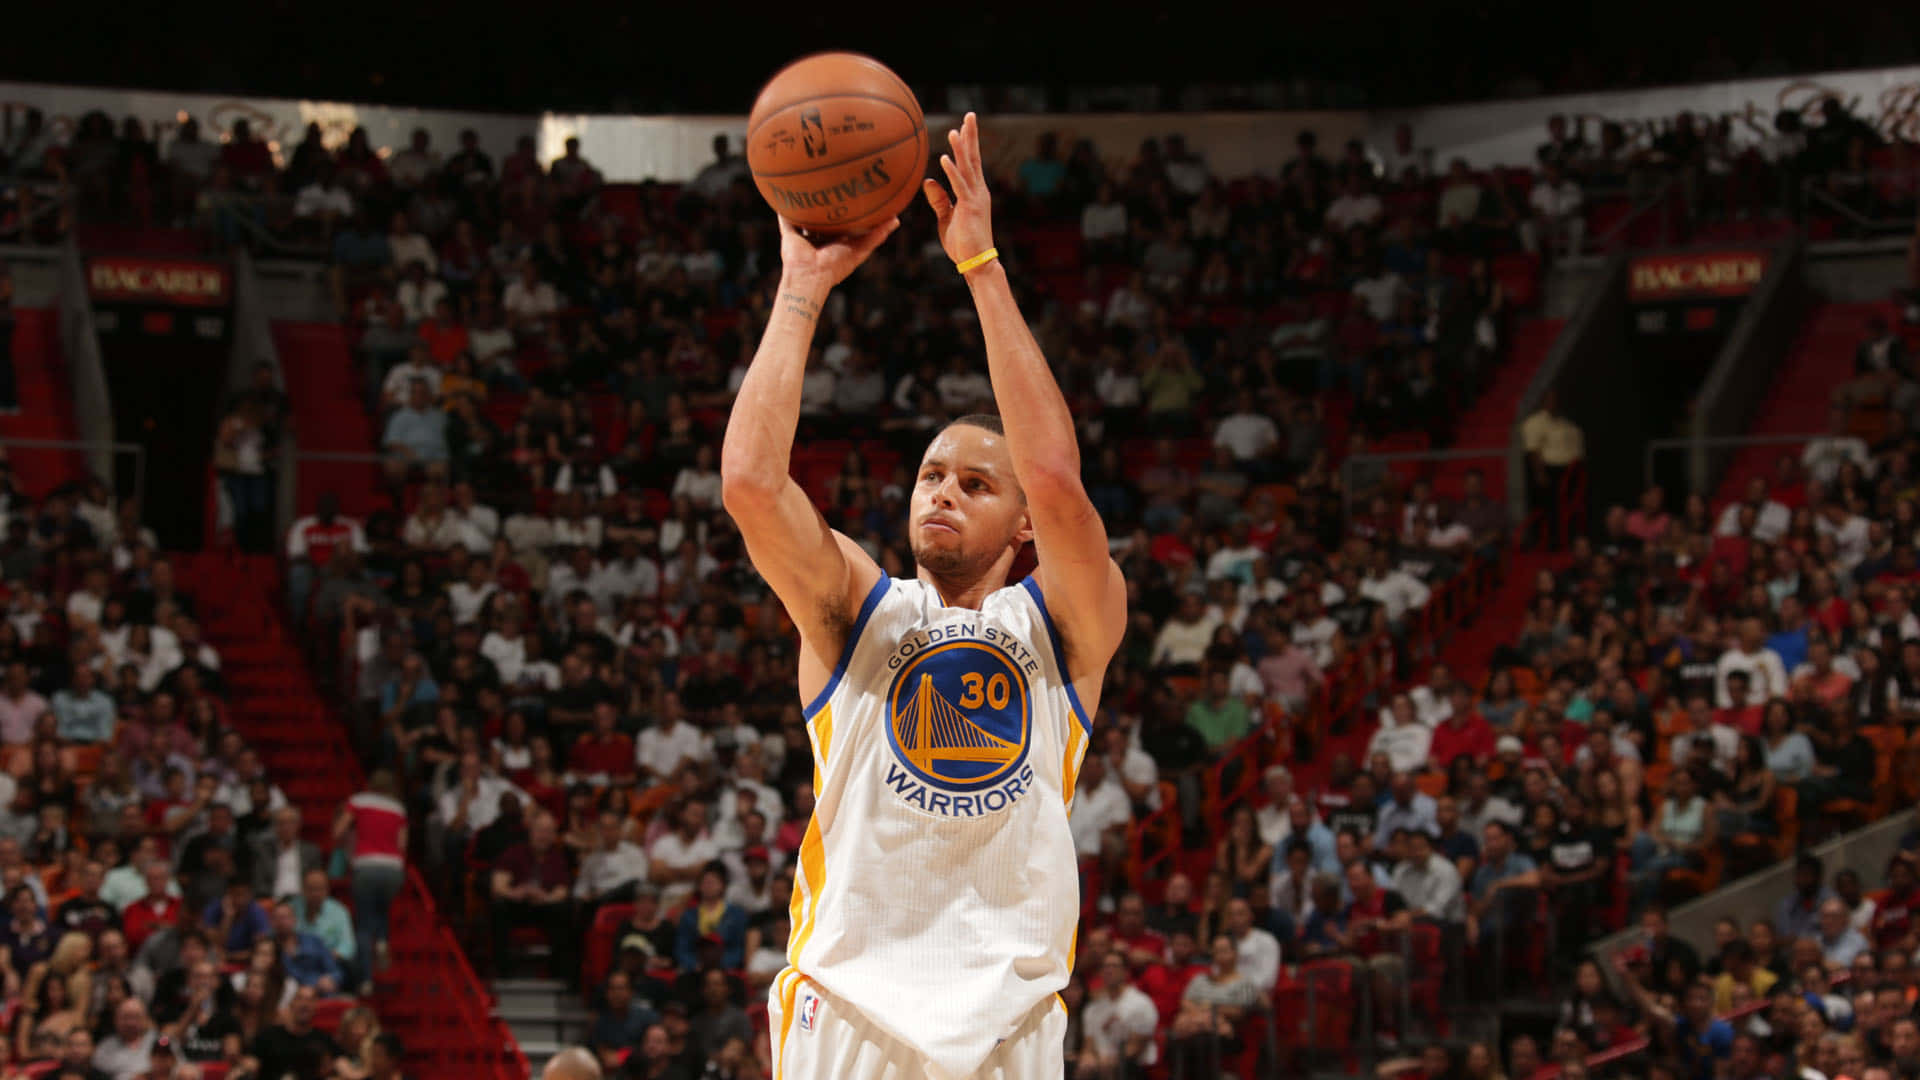 Stephen Curry showcasing his skills on the basketball court